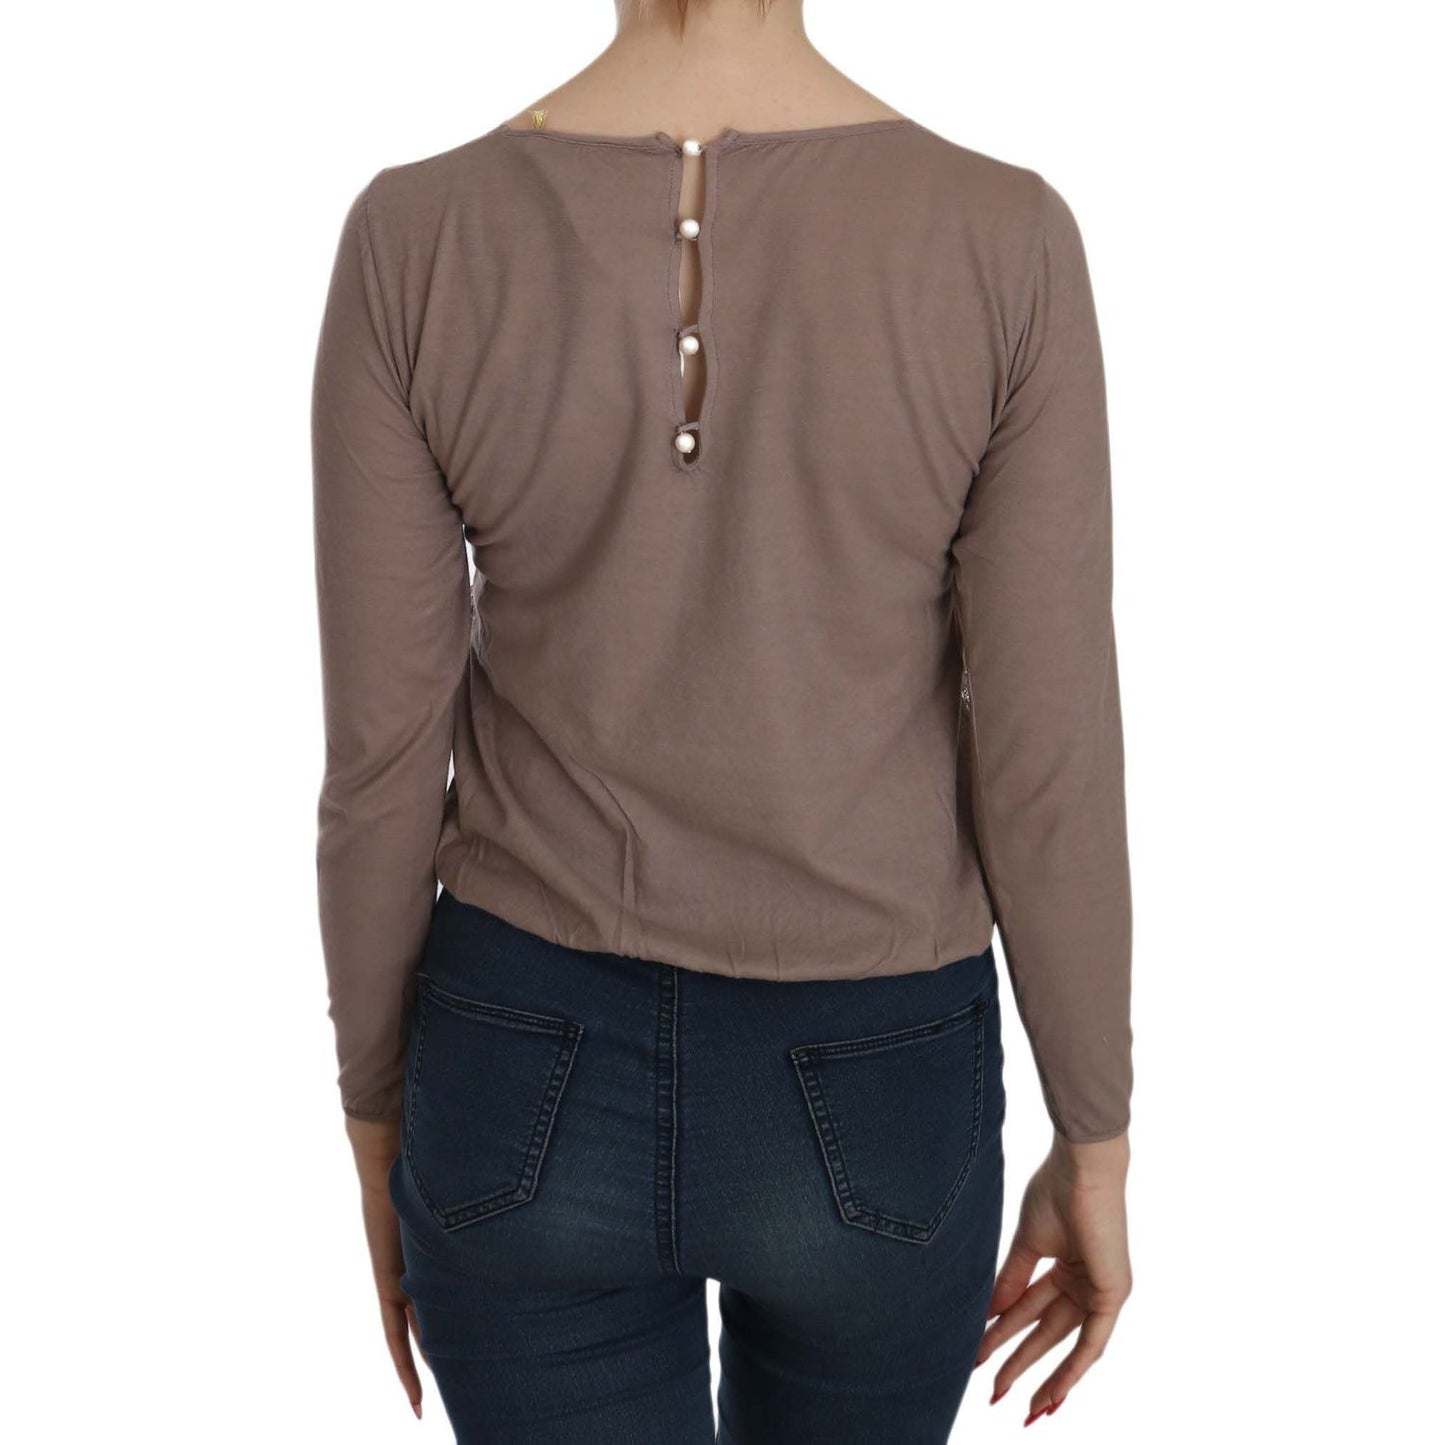 PINK MEMORIES Boat Neck Cotton Lace Blouse brown-lace-see-through-long-sleeve-top